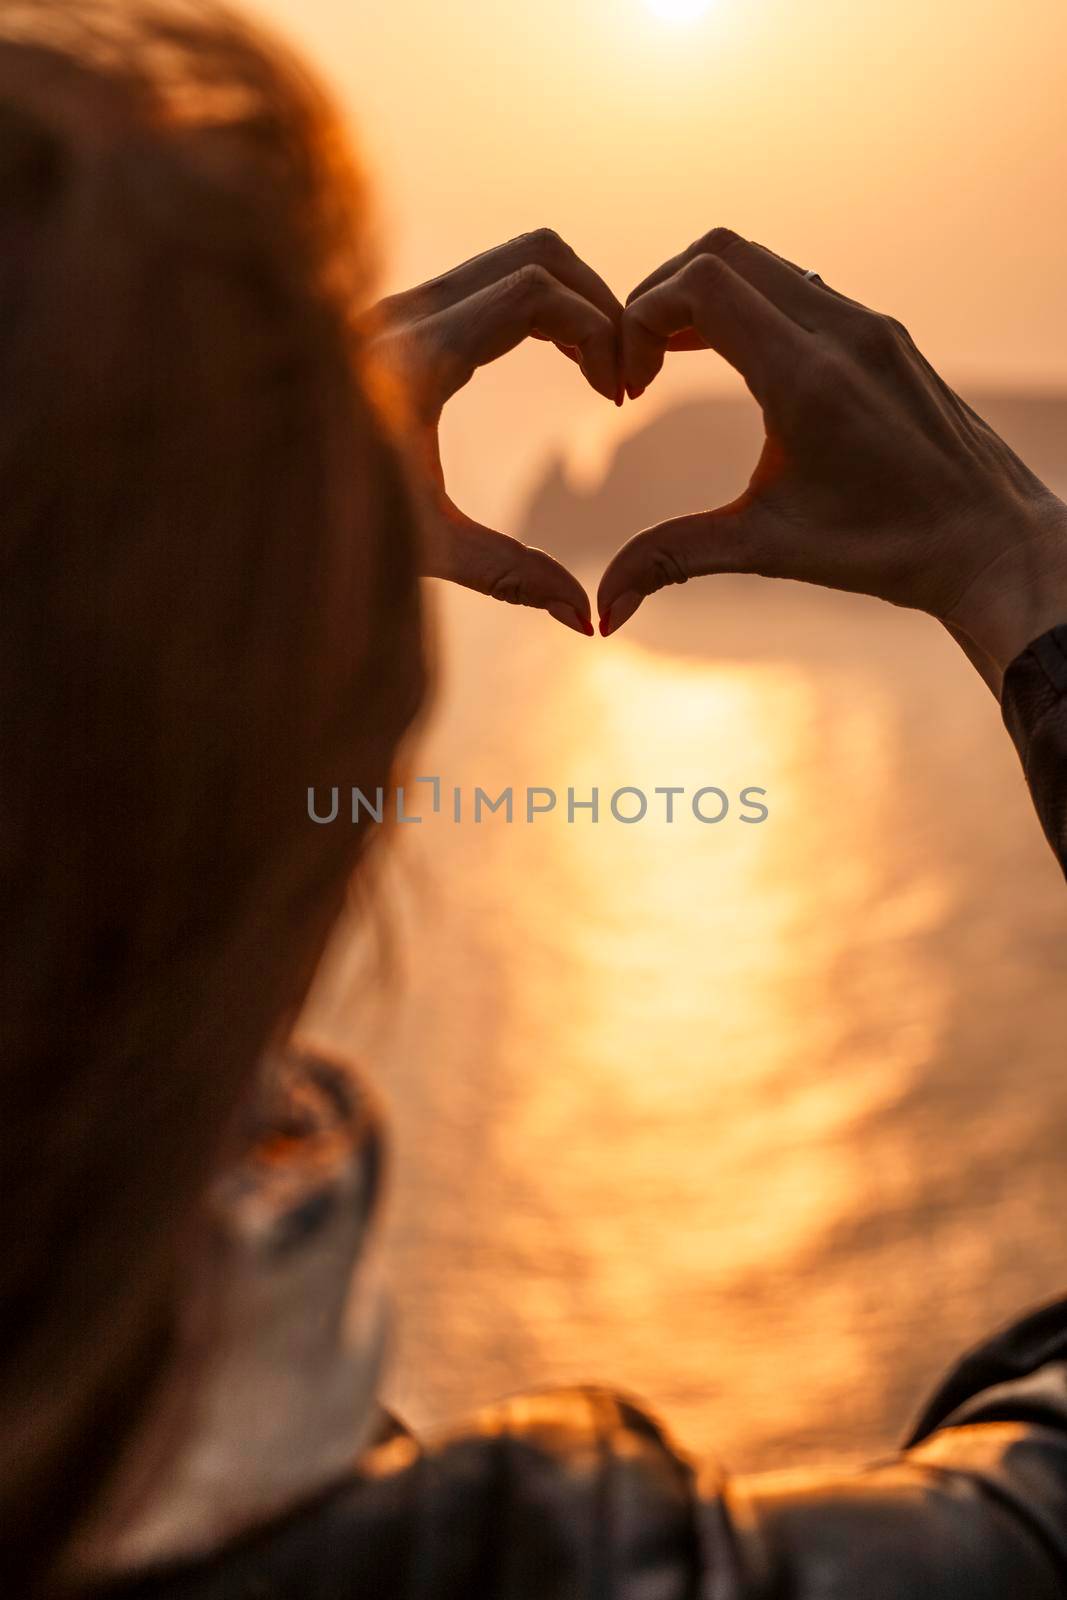 Women's hands symbol of the heart lifestyle and feelings concept with sunset light nature on a winter background. Valentine's day by Matiunina